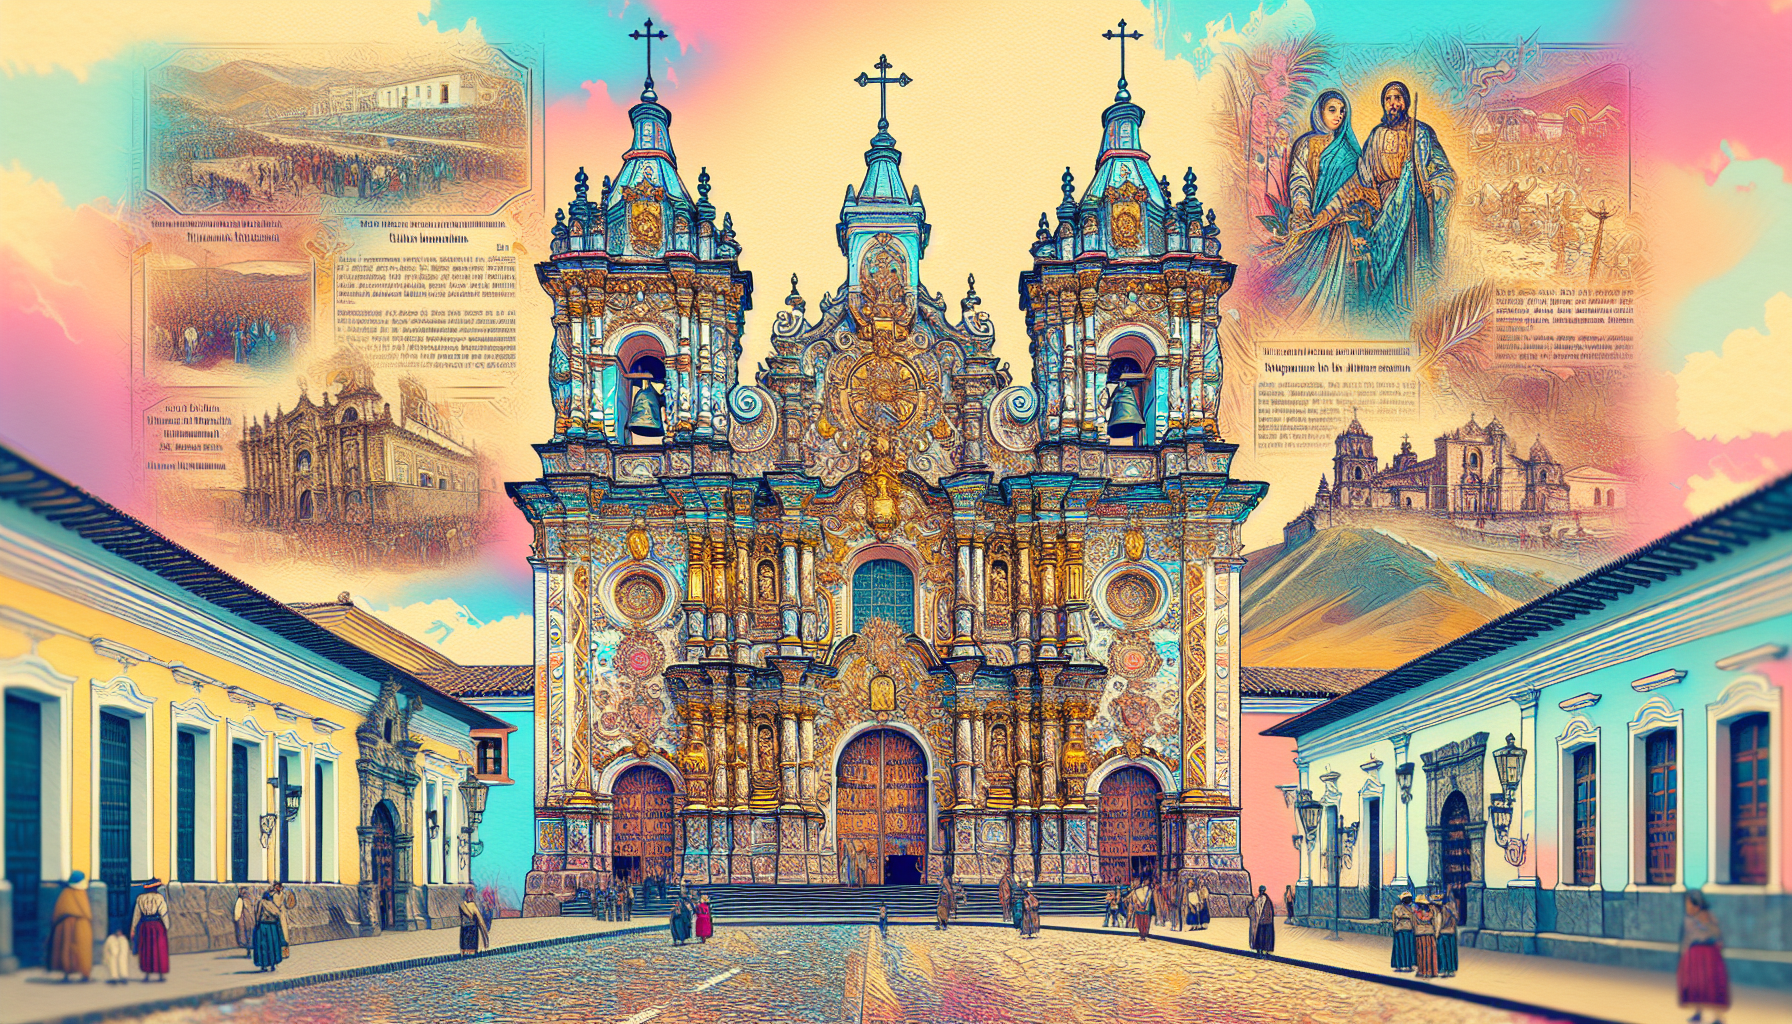 Generate an image of the historic Quito Church, La Compañía de Jesús, set against a vibrant Ecuadorian landscape. The foreground should feature intricate Baroque architectural details, adorned with go